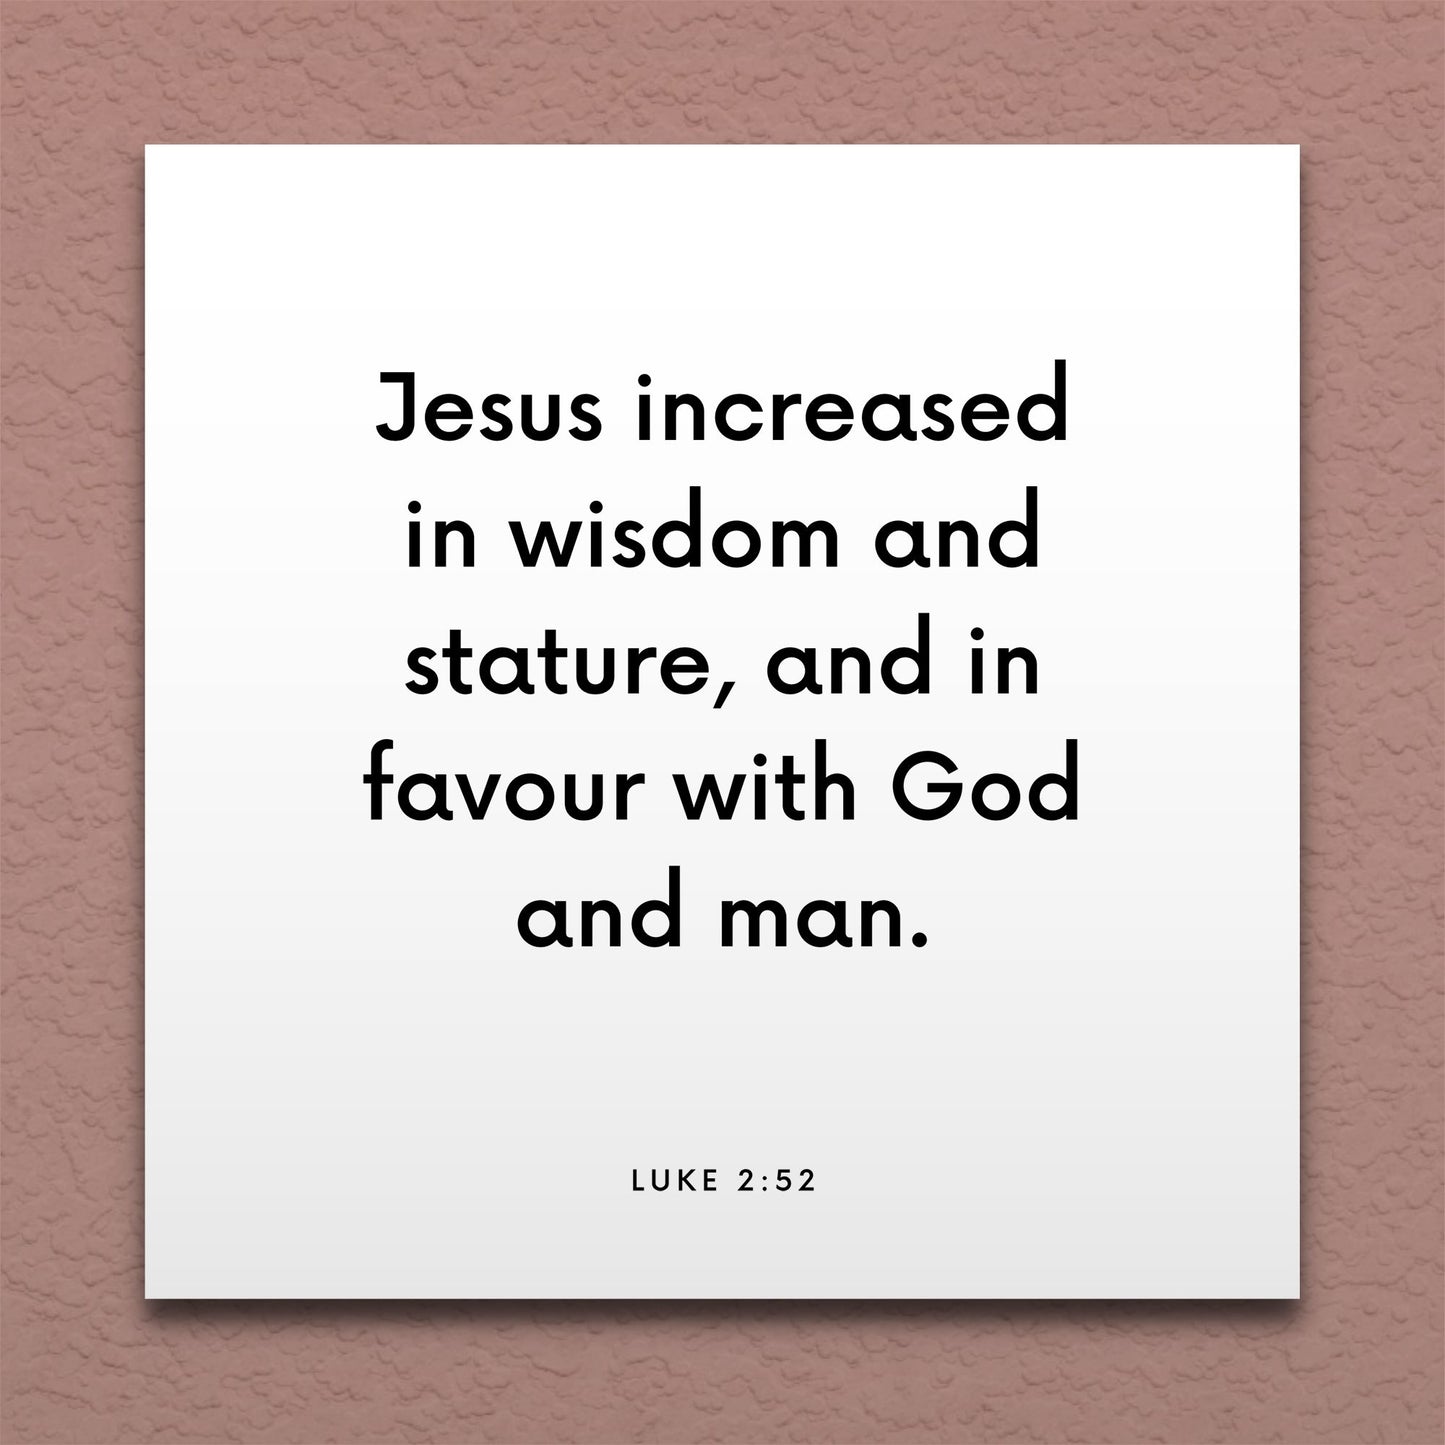 Wall-mounted scripture tile for Luke 2:52 - "Jesus increased in wisdom and stature"